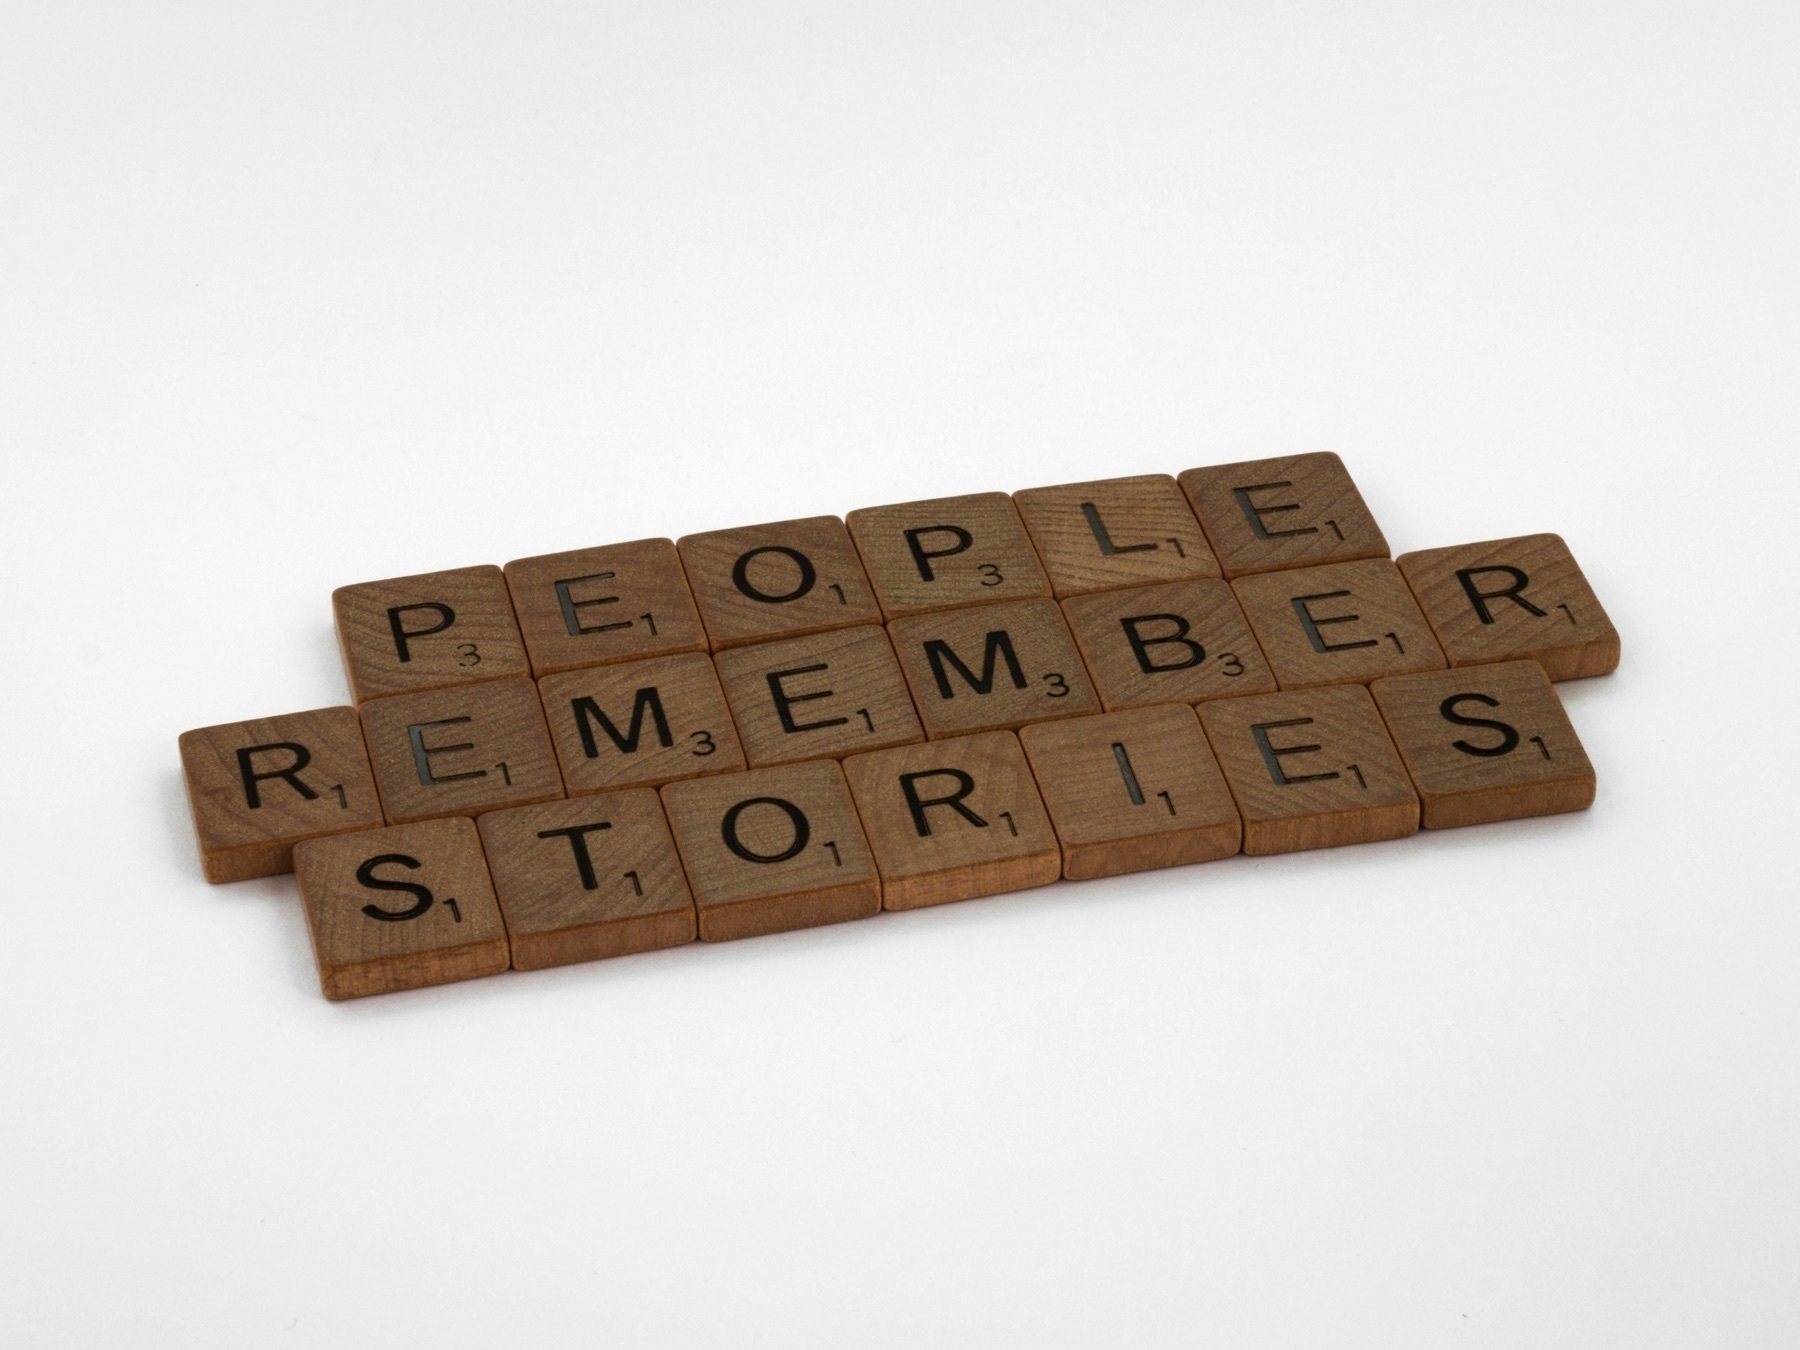 Scrabble tiles that read, “people remember stories.”